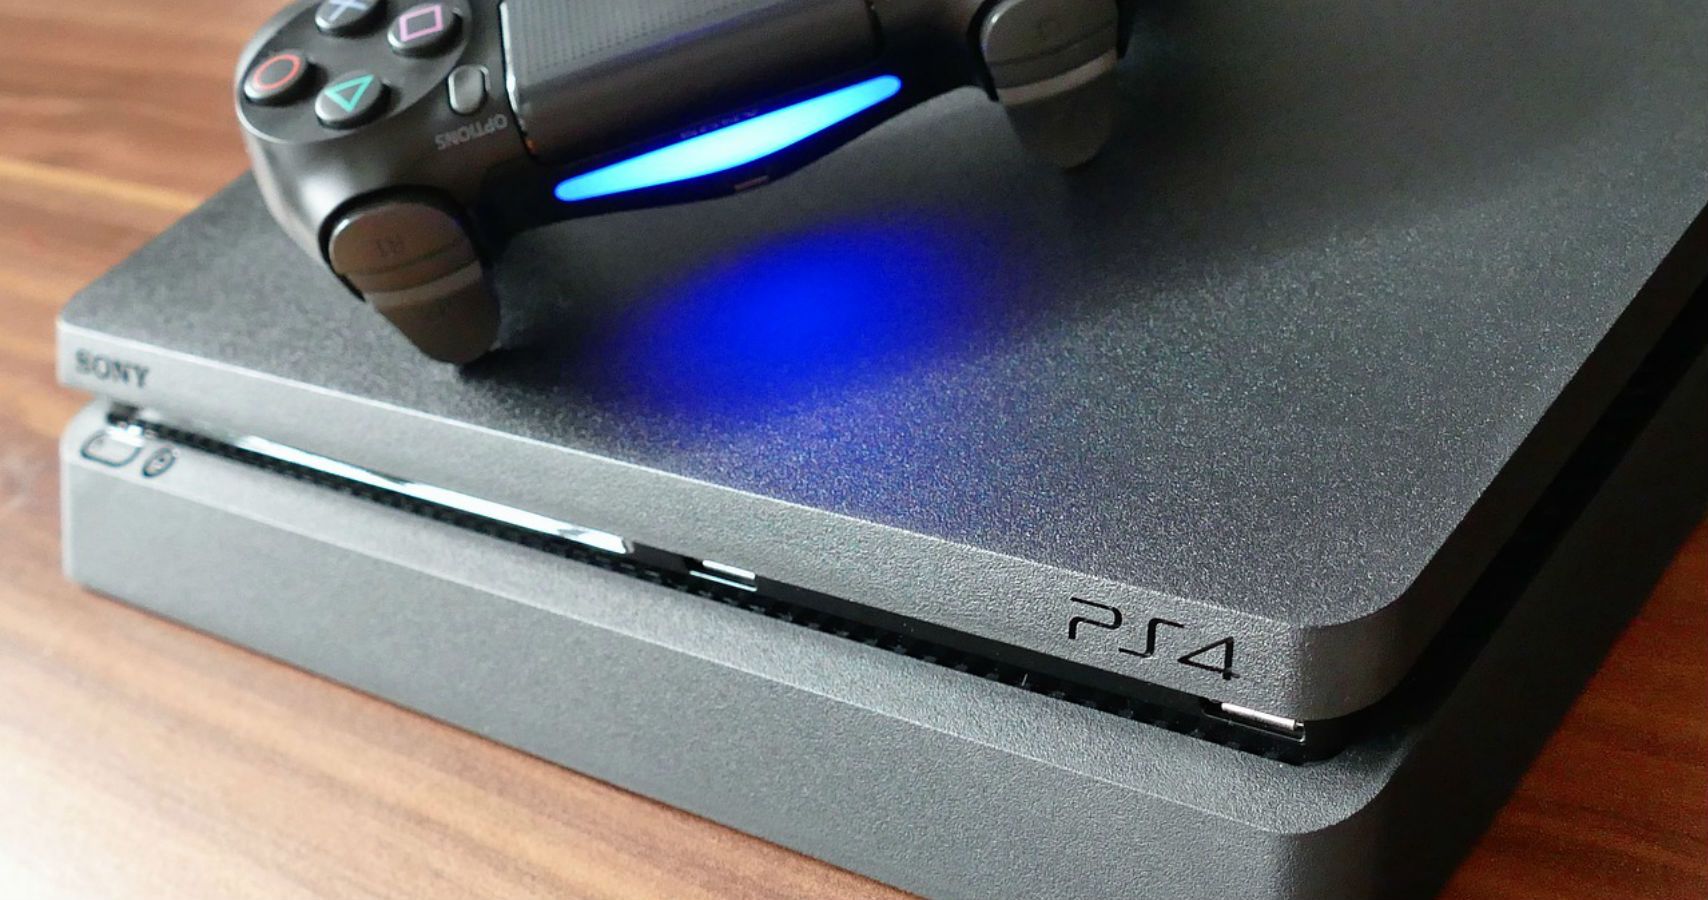 Sony Confirms It Is Working On Cross Generational Play Between PS4 & PS5